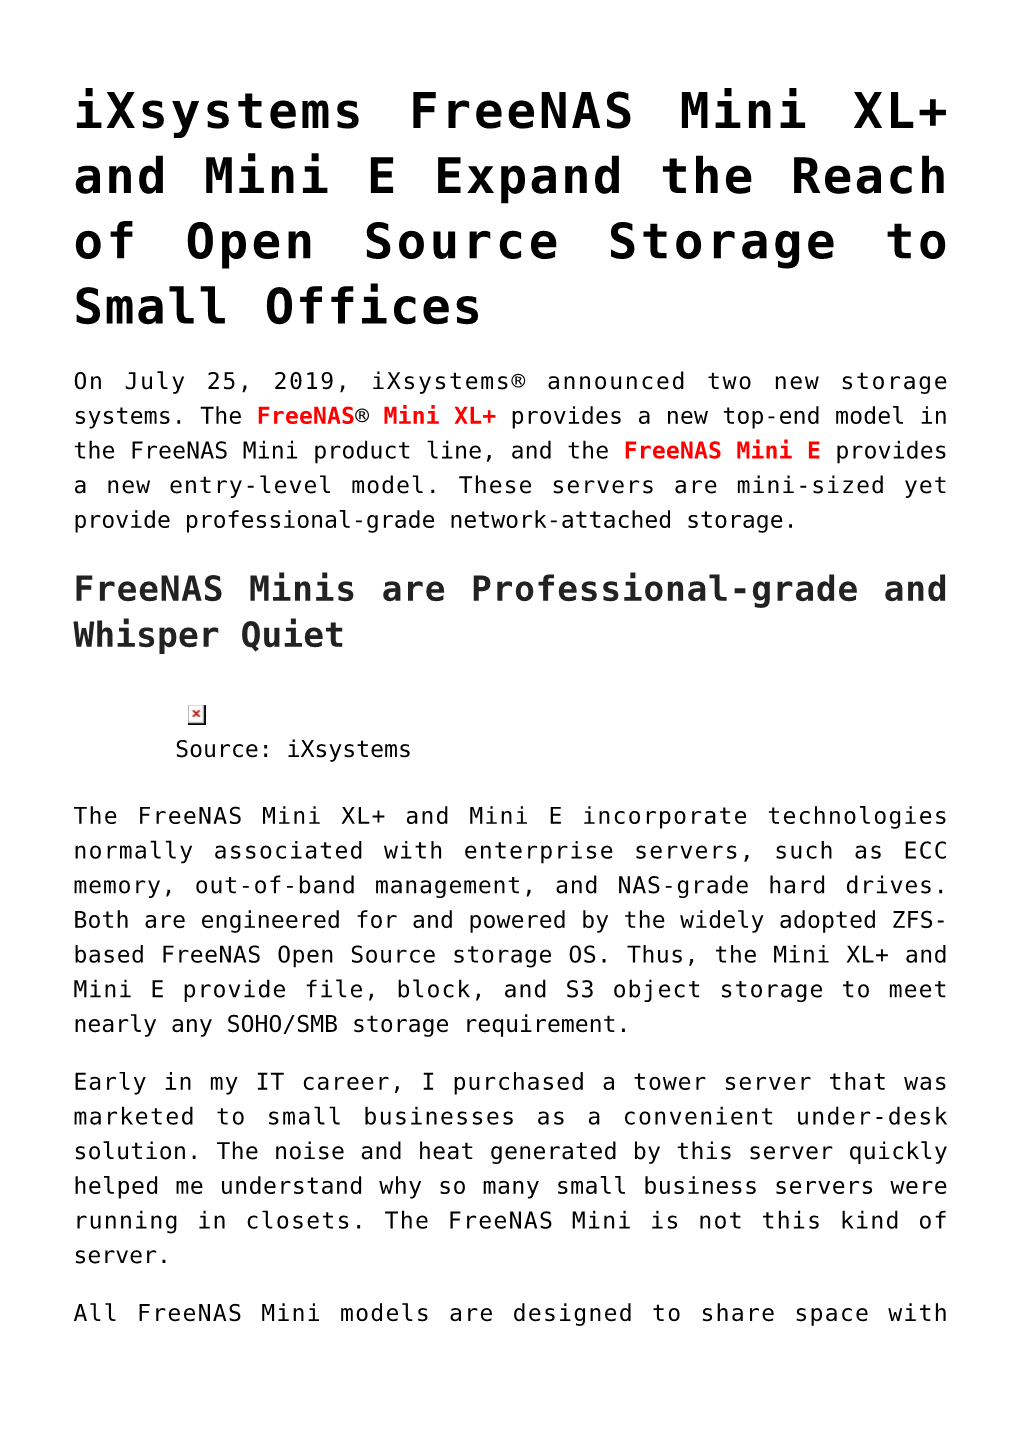 Ixsystems Freenas Mini XL+ and Mini E Expand the Reach of Open Source Storage to Small Offices